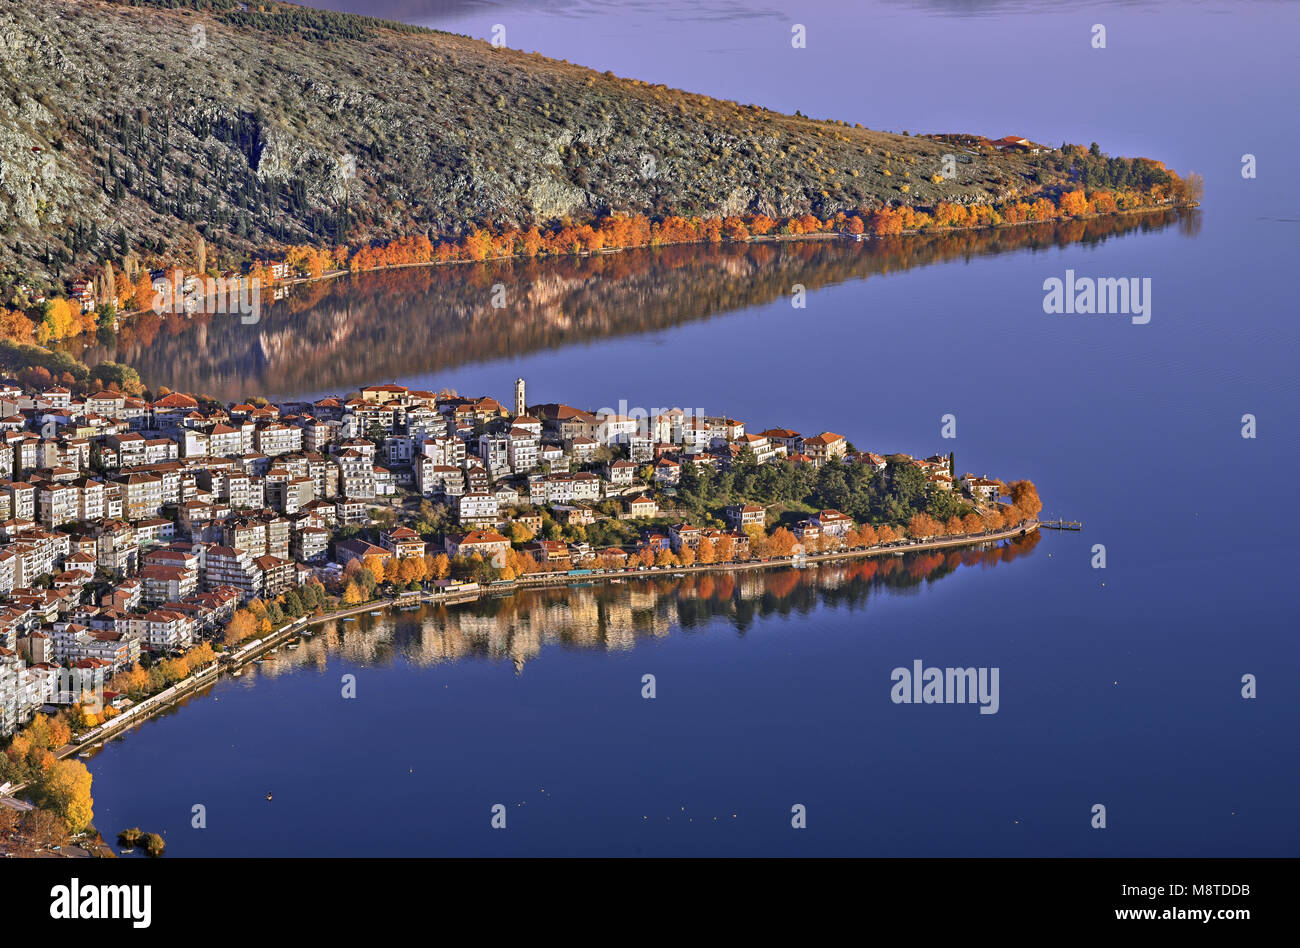 Aerial panoramic view of Kastoria city, a traditional gorgeous town built on the shores of Lake Orestiada,West Macedonia, Greece Stock Photo